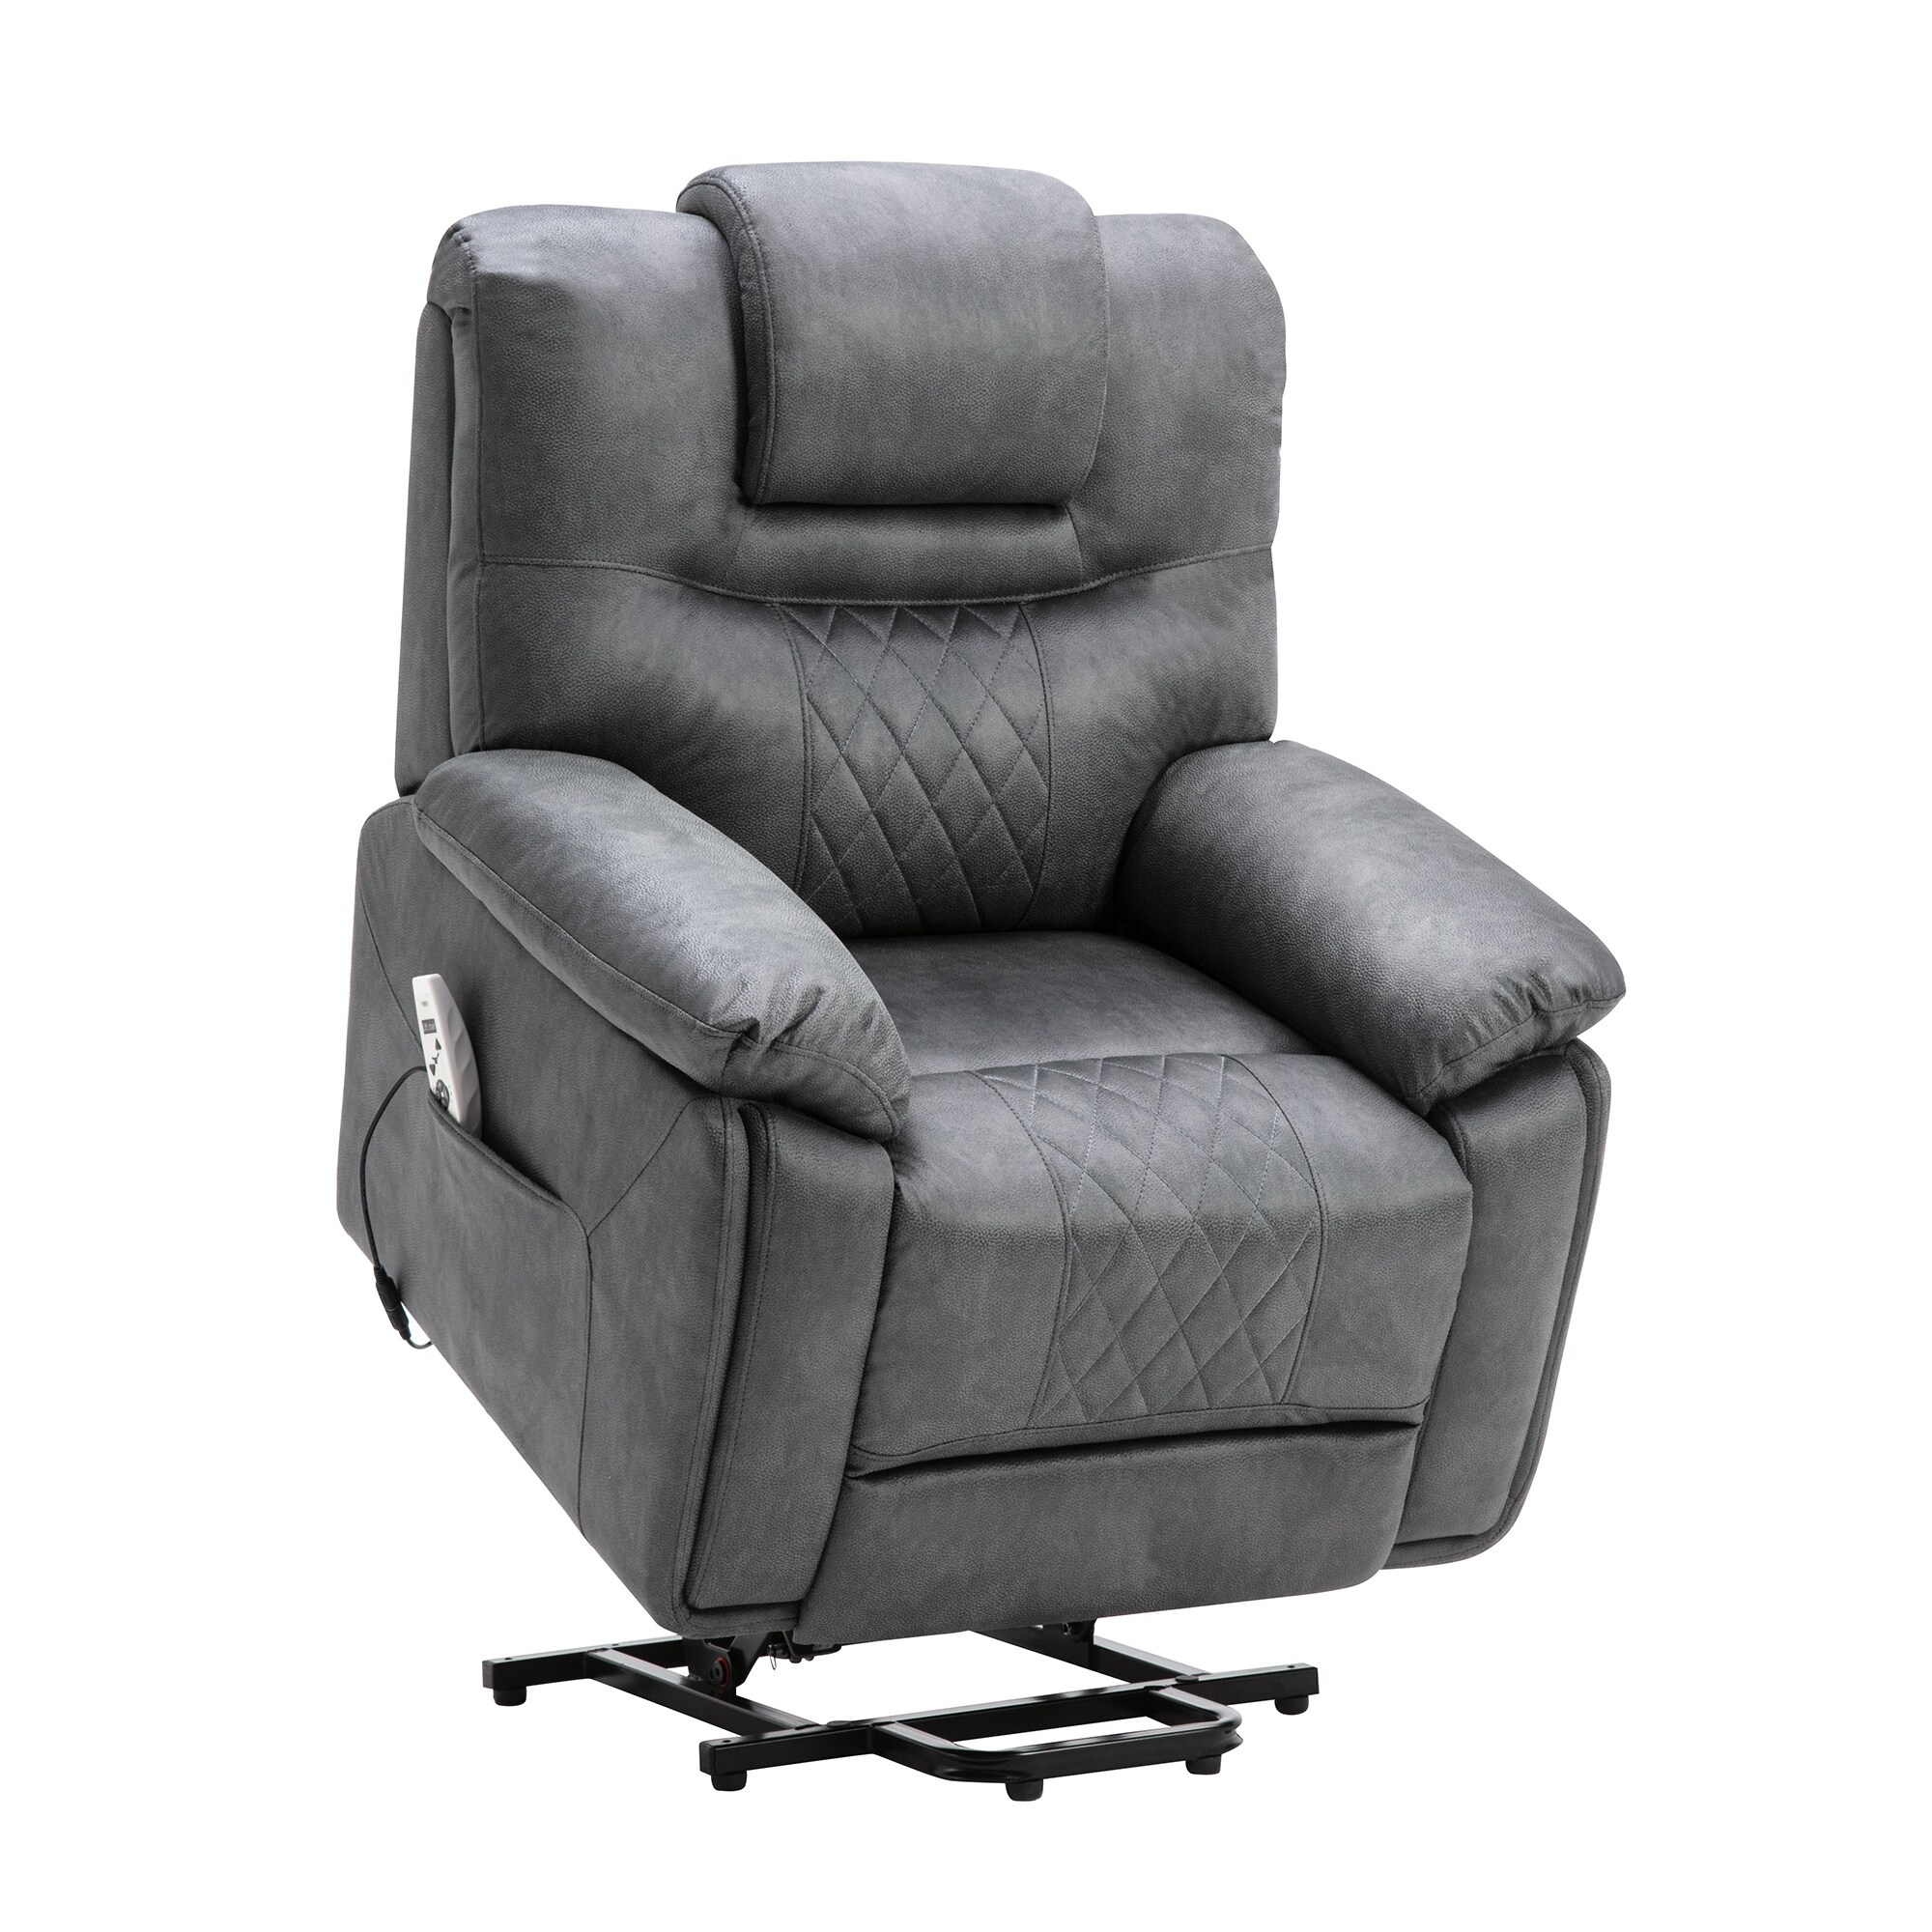 Power Lift Upholstered Recliner Chair with Heating System, Adjustable Massage Function and Remote